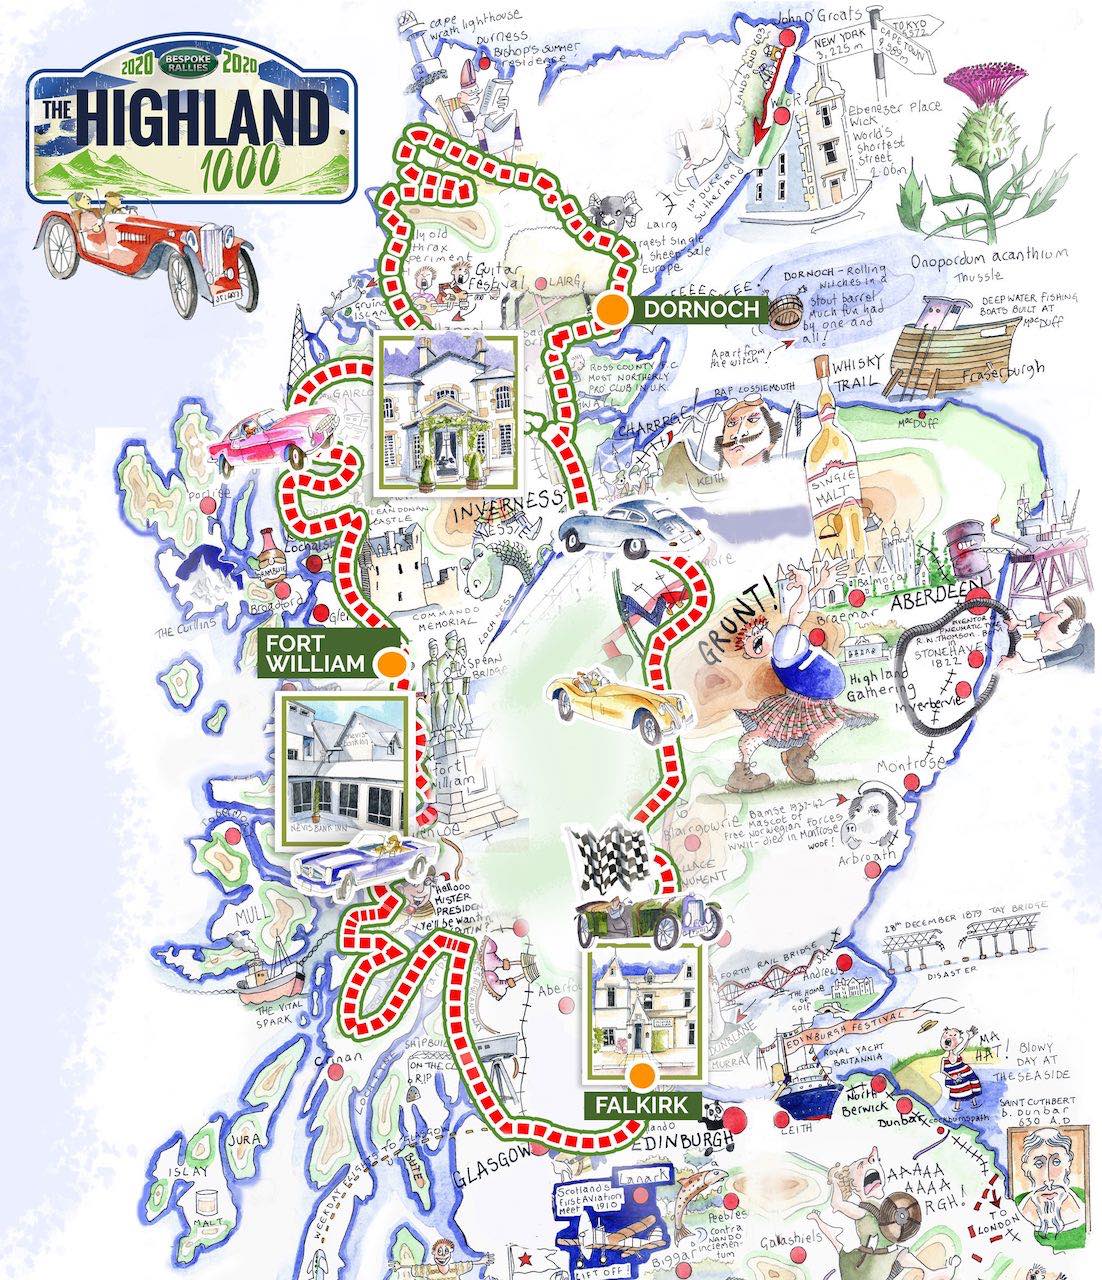 Highland 1000 set for UK's first post-lockdown classic car rally